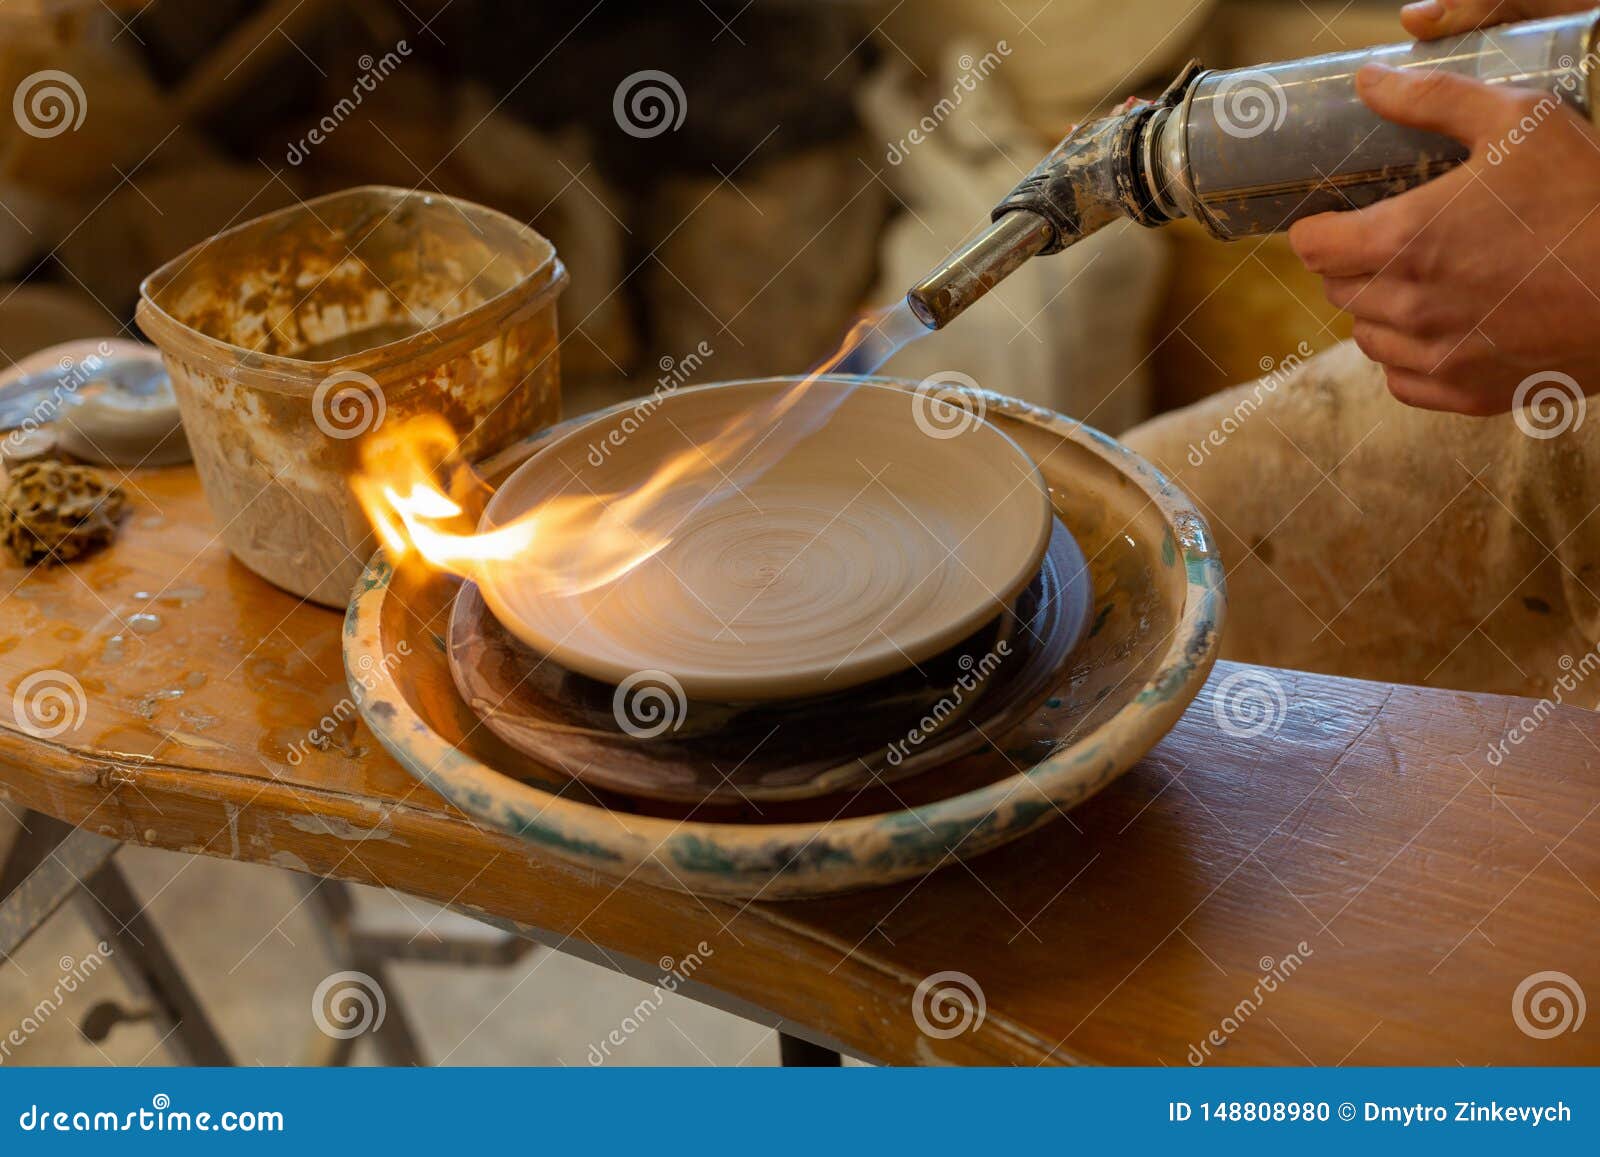 Pottery Master Baking Clay Plate with Special Apparat Stock Photo